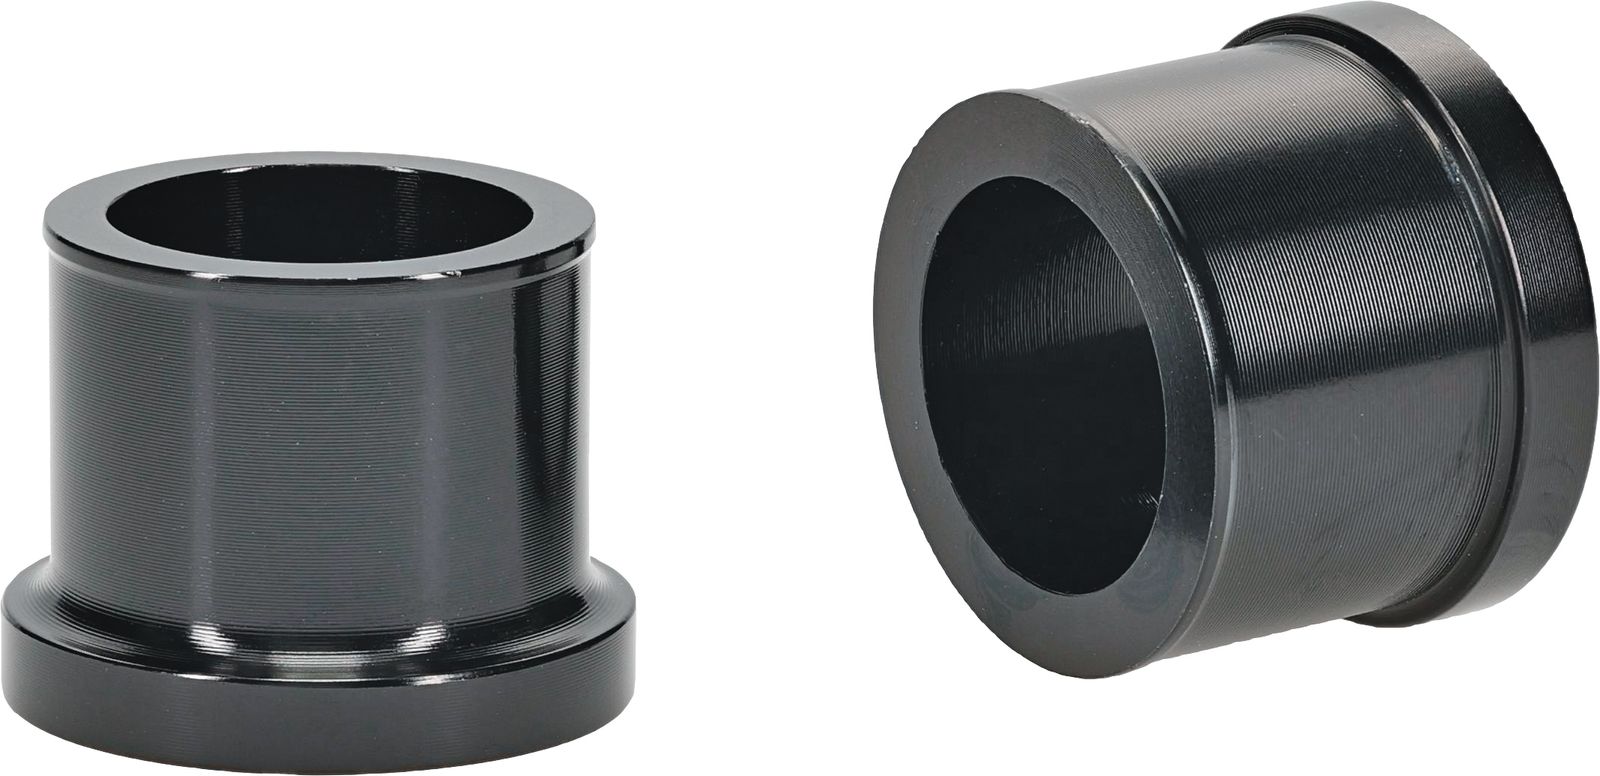 Wrp Front Wheel Spacer Kits - WRP111096 image